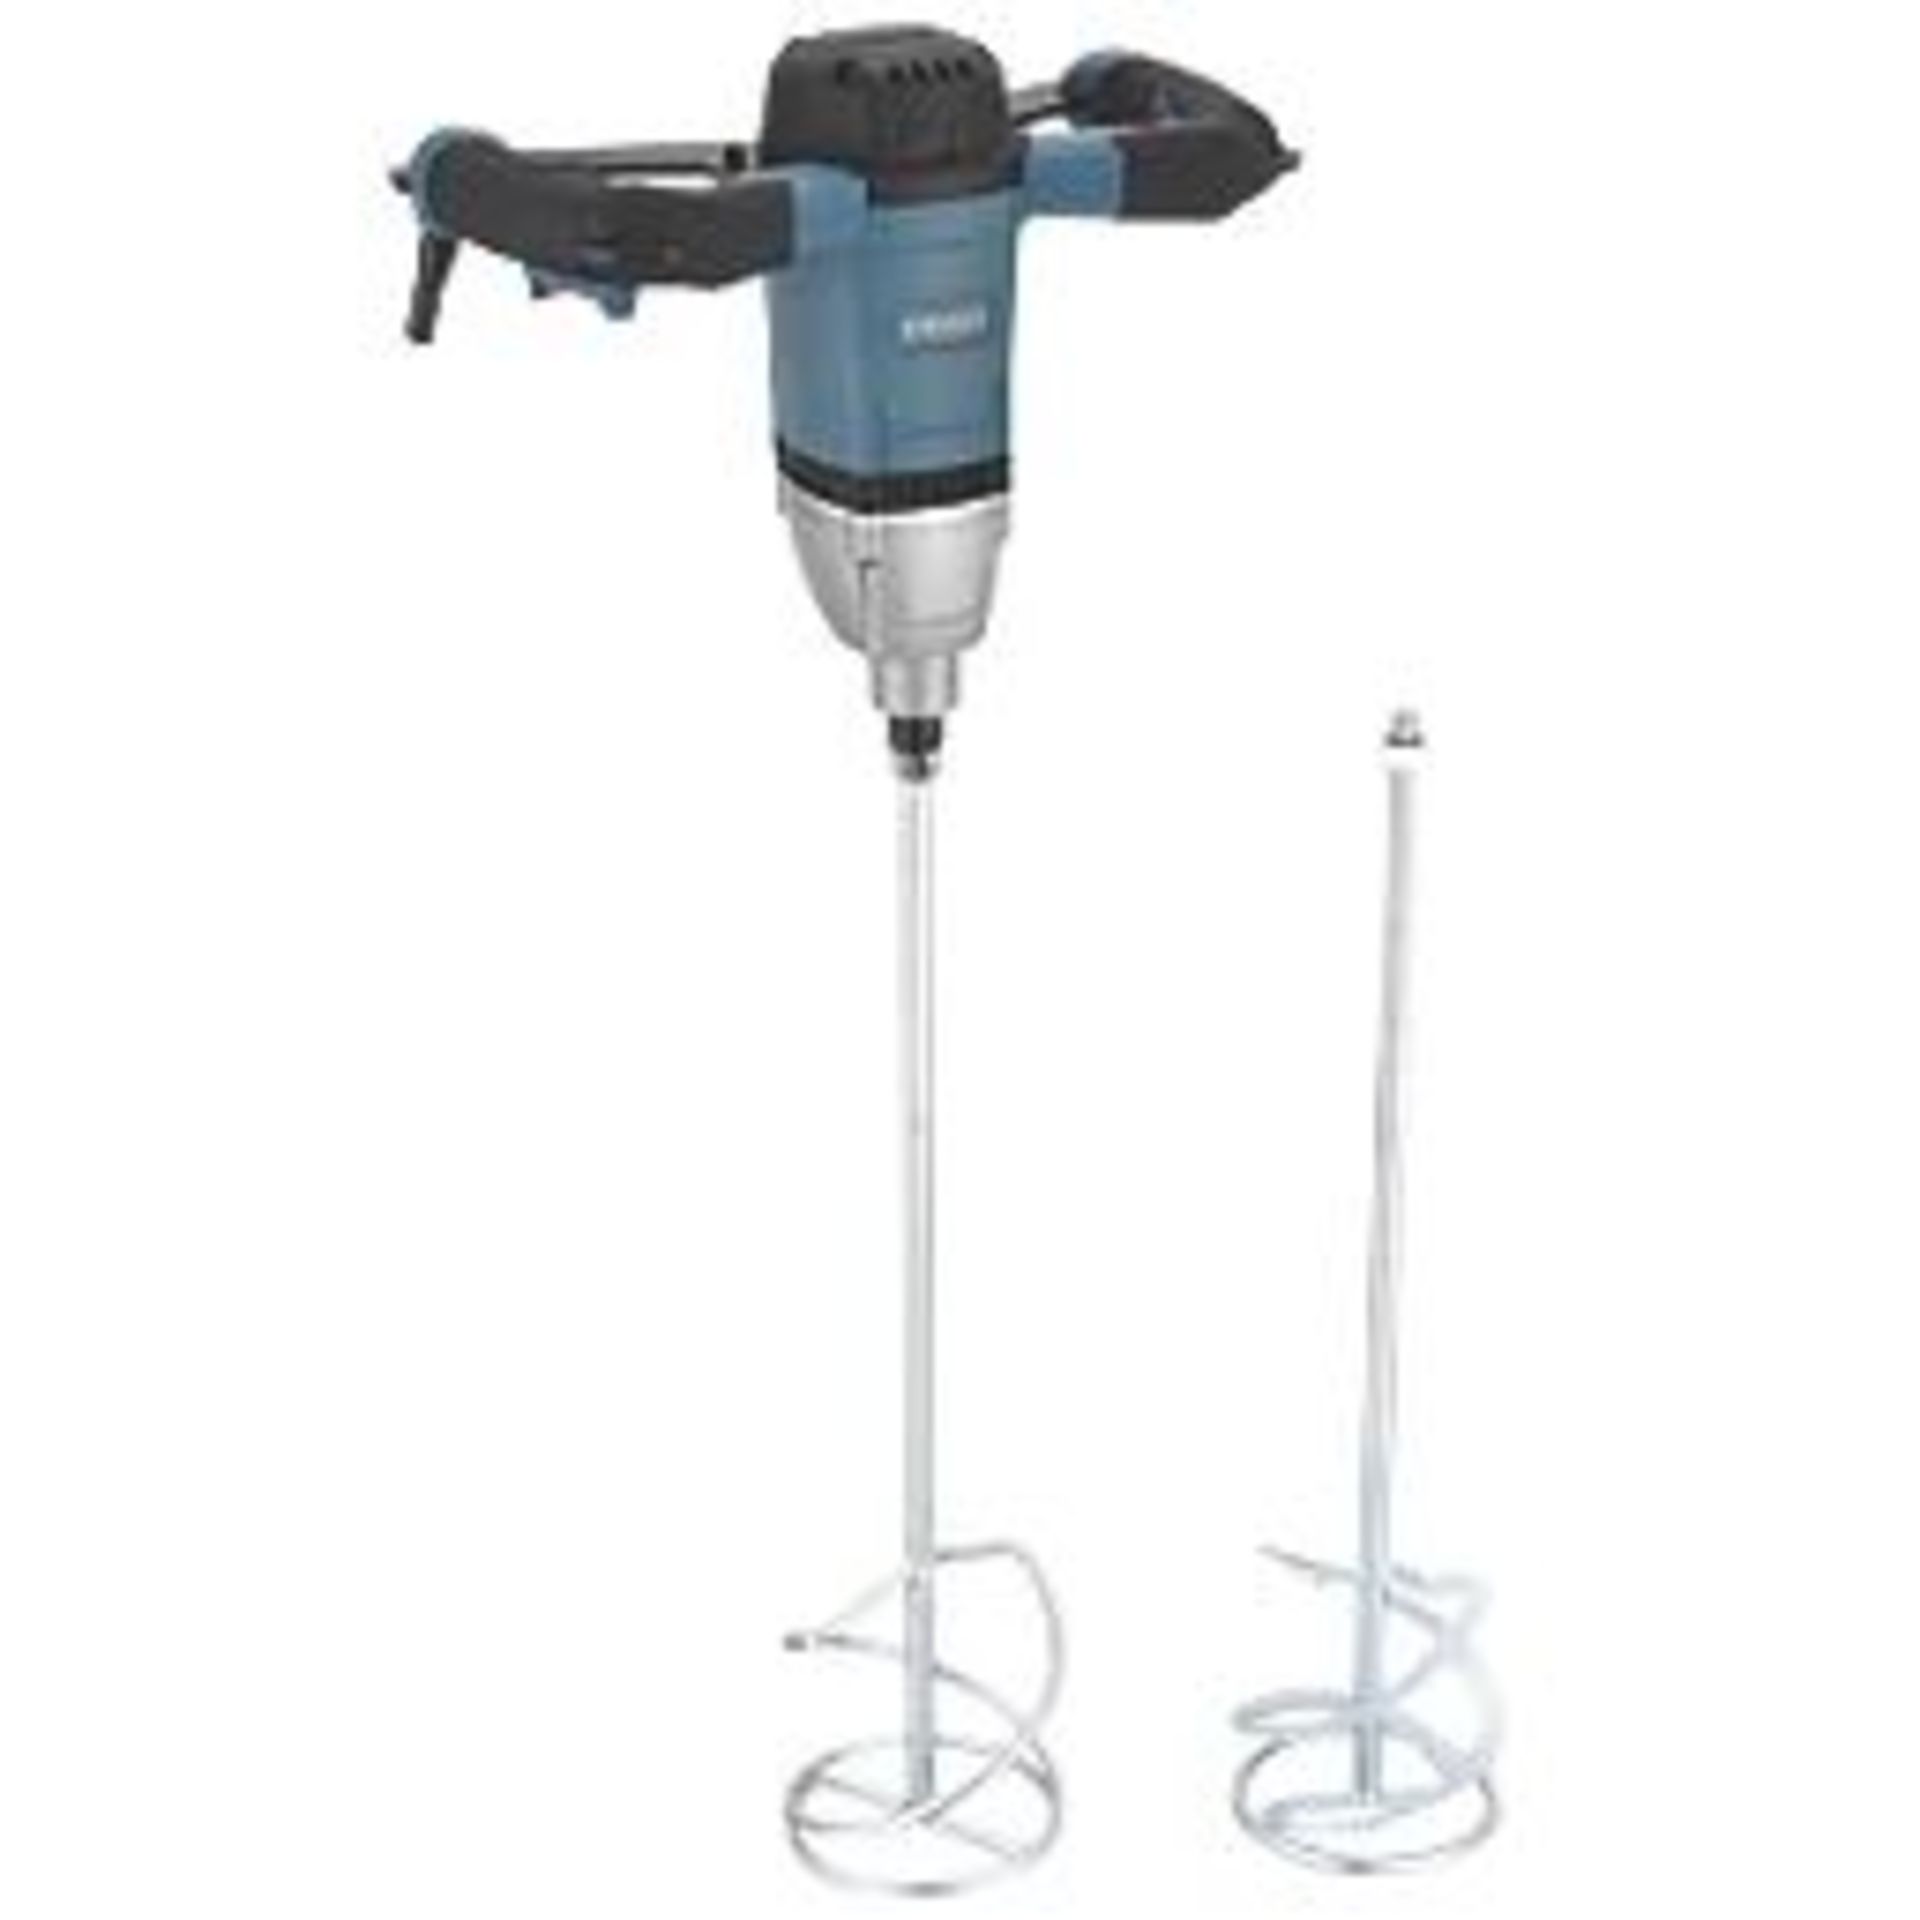 ERBAUER EPM1600 1600W ELECTRIC PADDLE MIXER 220-240V. - R14.9. Powerful and durable paddle mixer